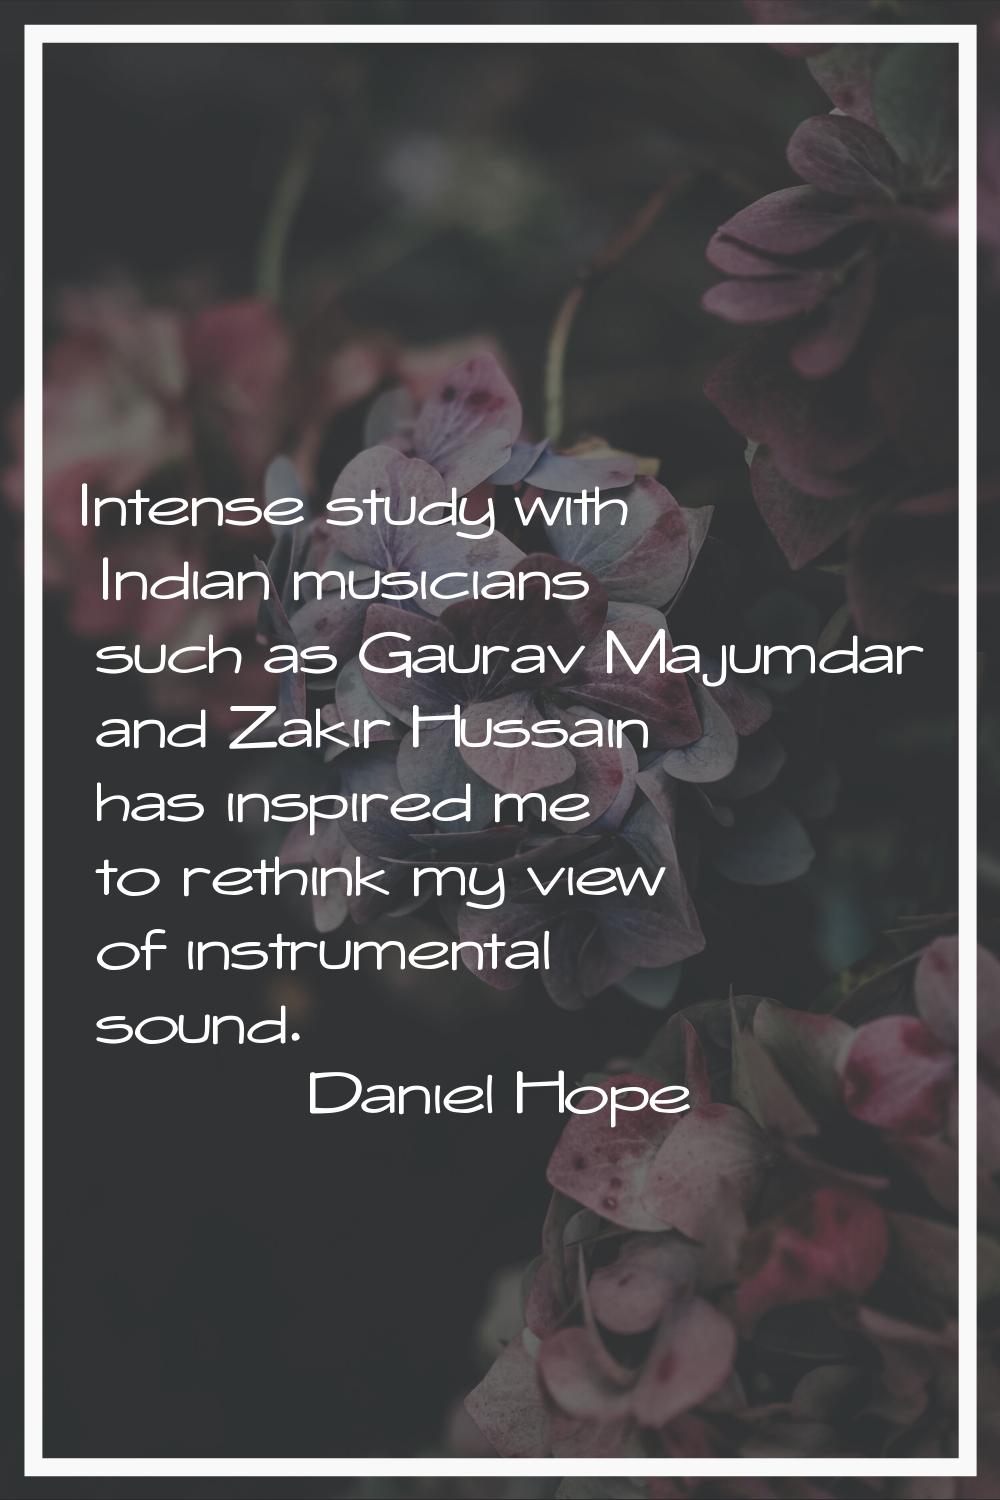 Intense study with Indian musicians such as Gaurav Majumdar and Zakir Hussain has inspired me to re